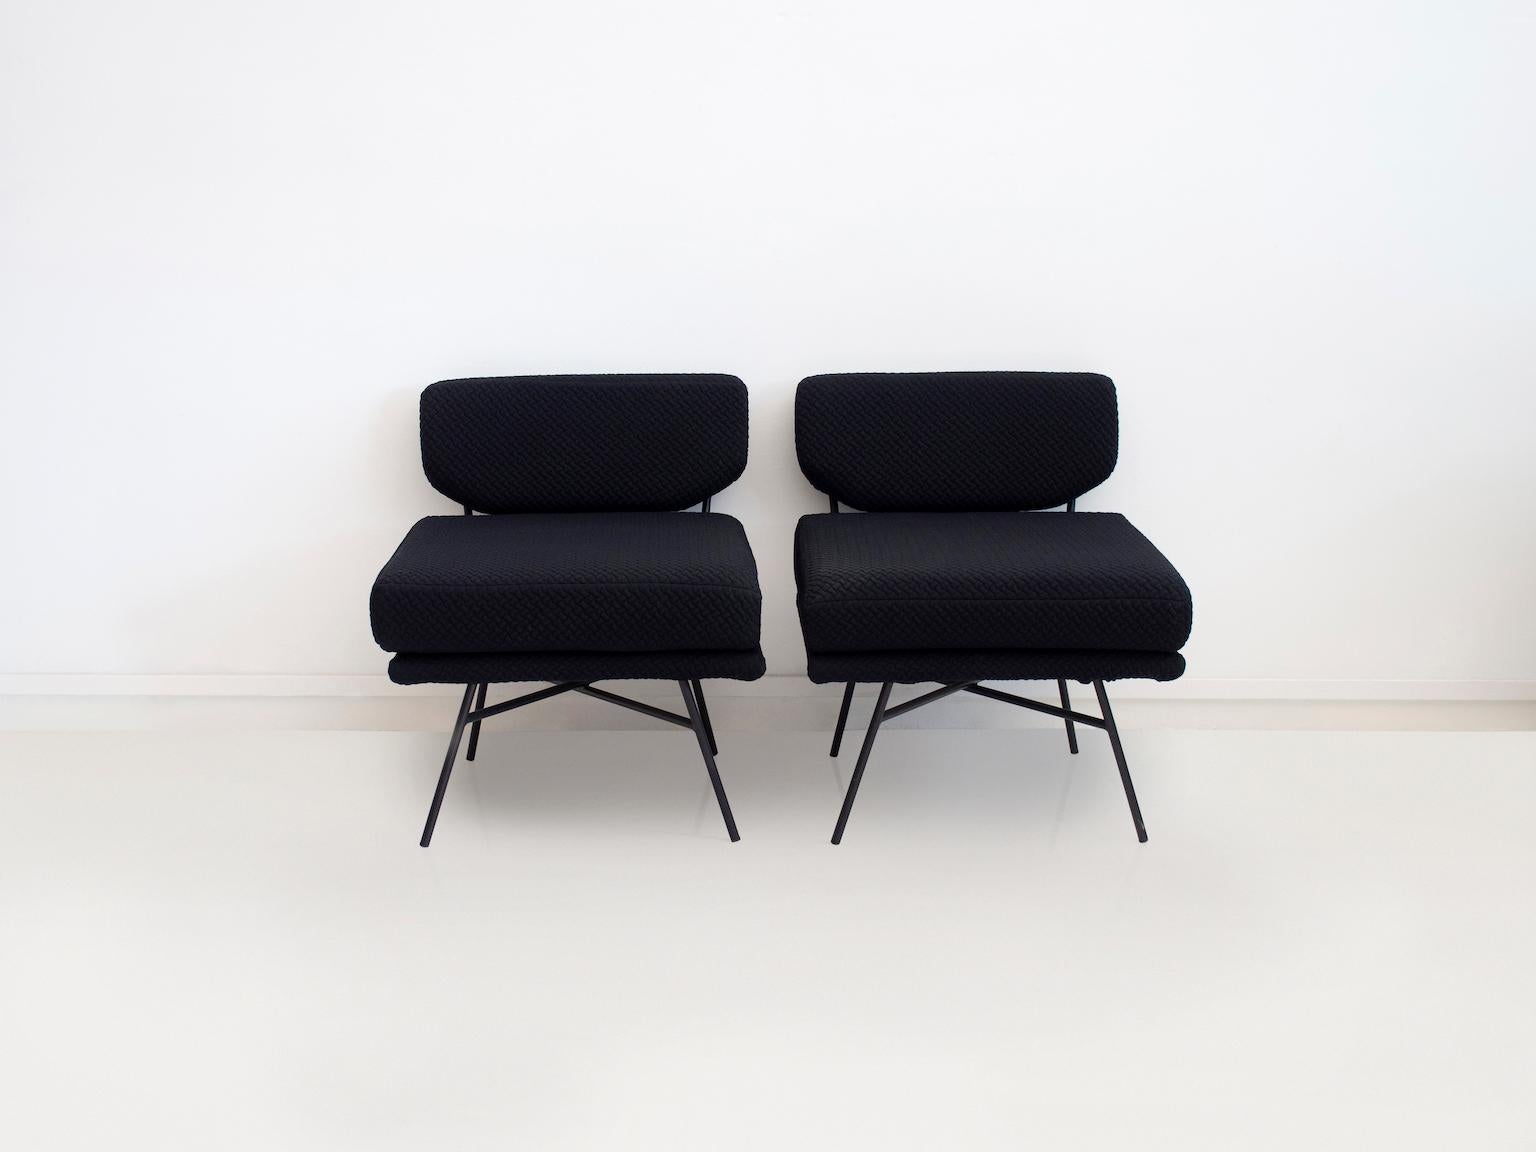 Pair of 'Elettra' chairs originally designed by B.B.P.R. in 1954, Italy. This pair of lounge chairs is produced by Arflex circa 2018, featuring black tubular steel frame and black embossed fabric upholstery.

The 'Elettra' lounge chair won the